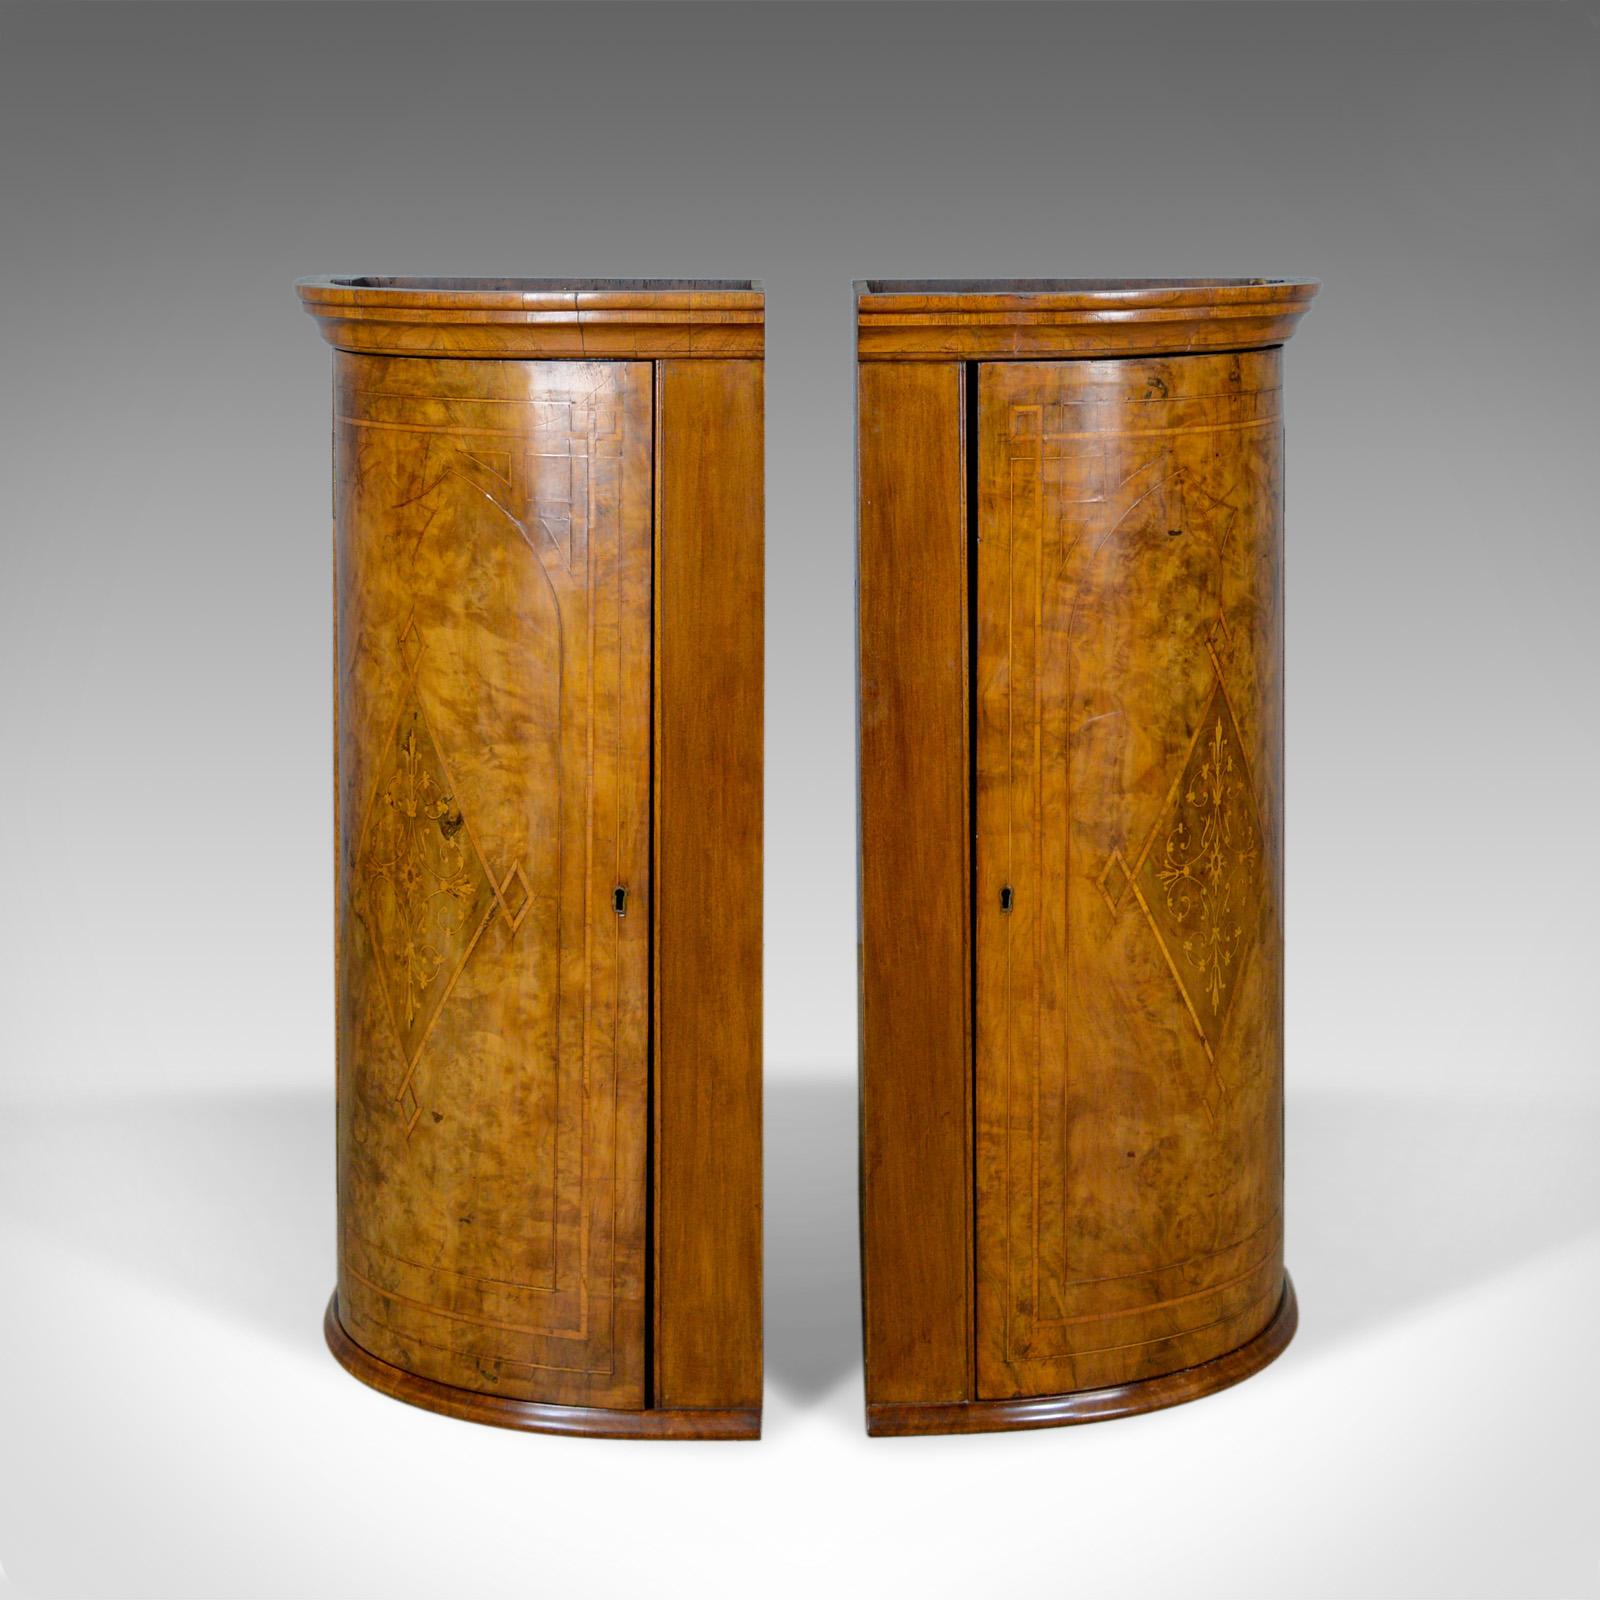 This is an opposed antique pair of Georgian revival corner cabinets. English, burr walnut hanging cupboards dating to the Edwardian period of the early 20th century, circa 1910.

Highly desirable opposed pair of cabinets
Well figured burr walnut